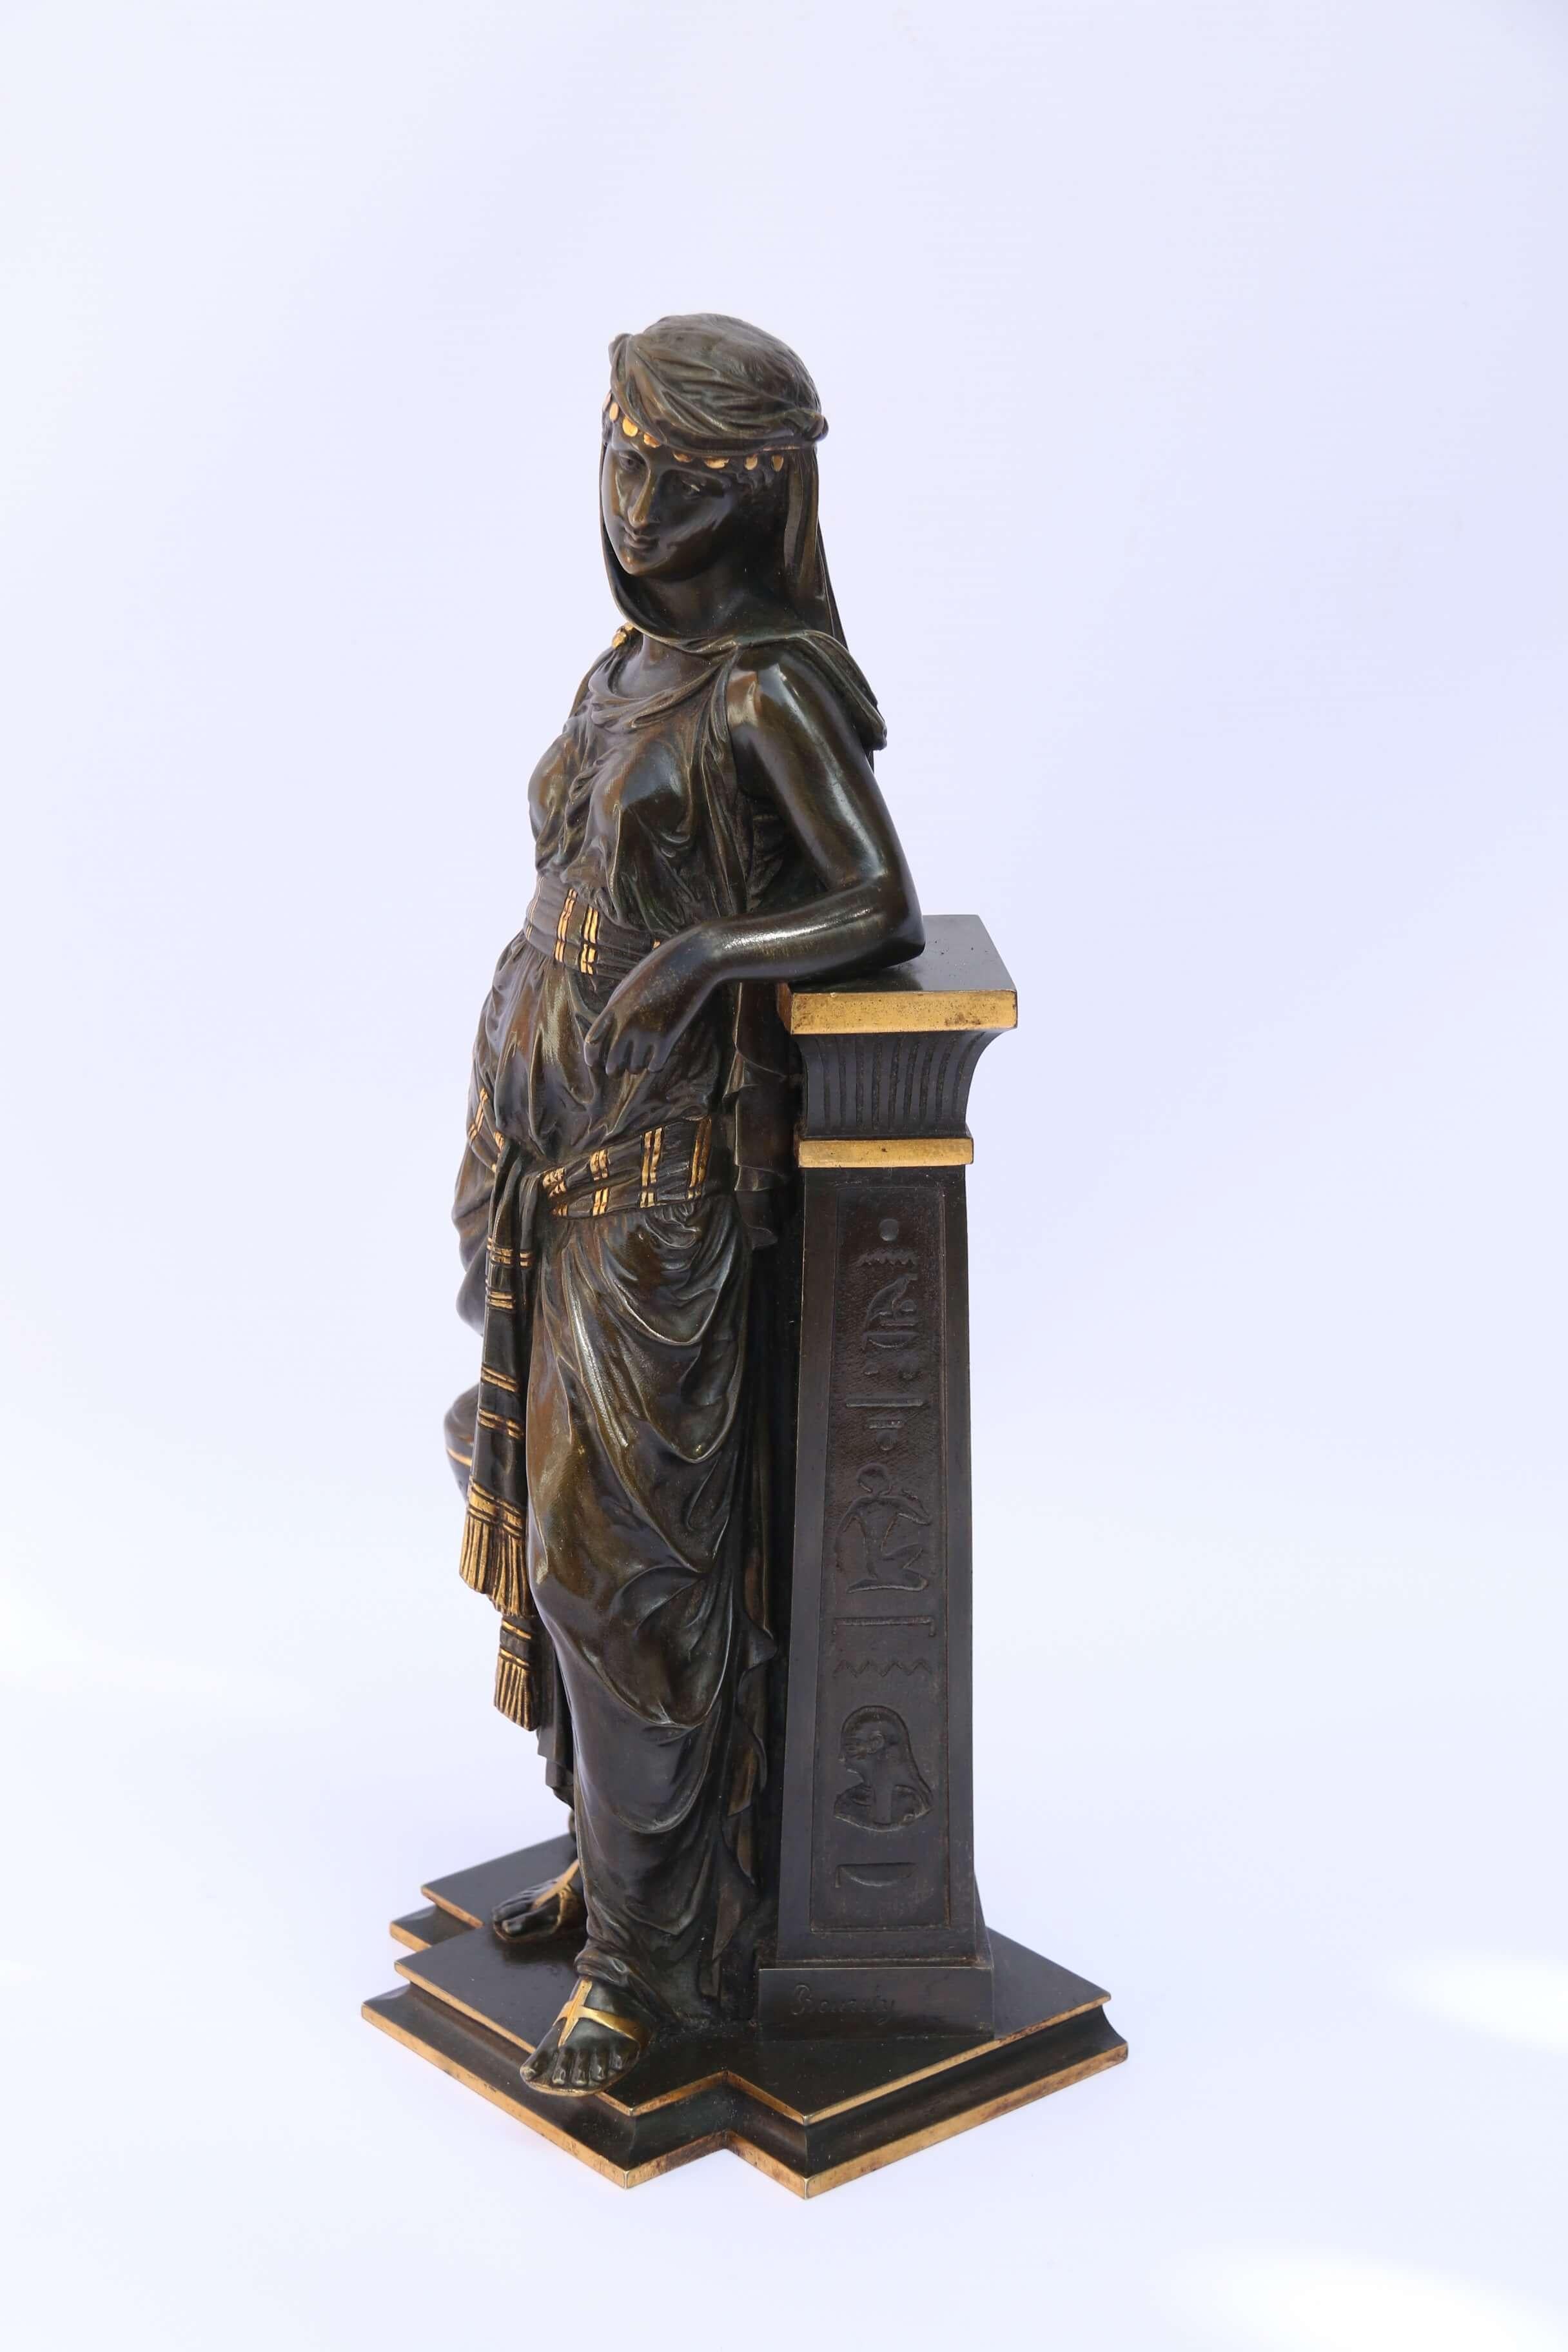 This top quality example by Eutrope Bouret (1833-1906) is depicting the classical young Egyptian maiden gathering water in a vessel. She is dressed in a typical robe and headdress of the period and is resting against a pilaster with hieroglyph